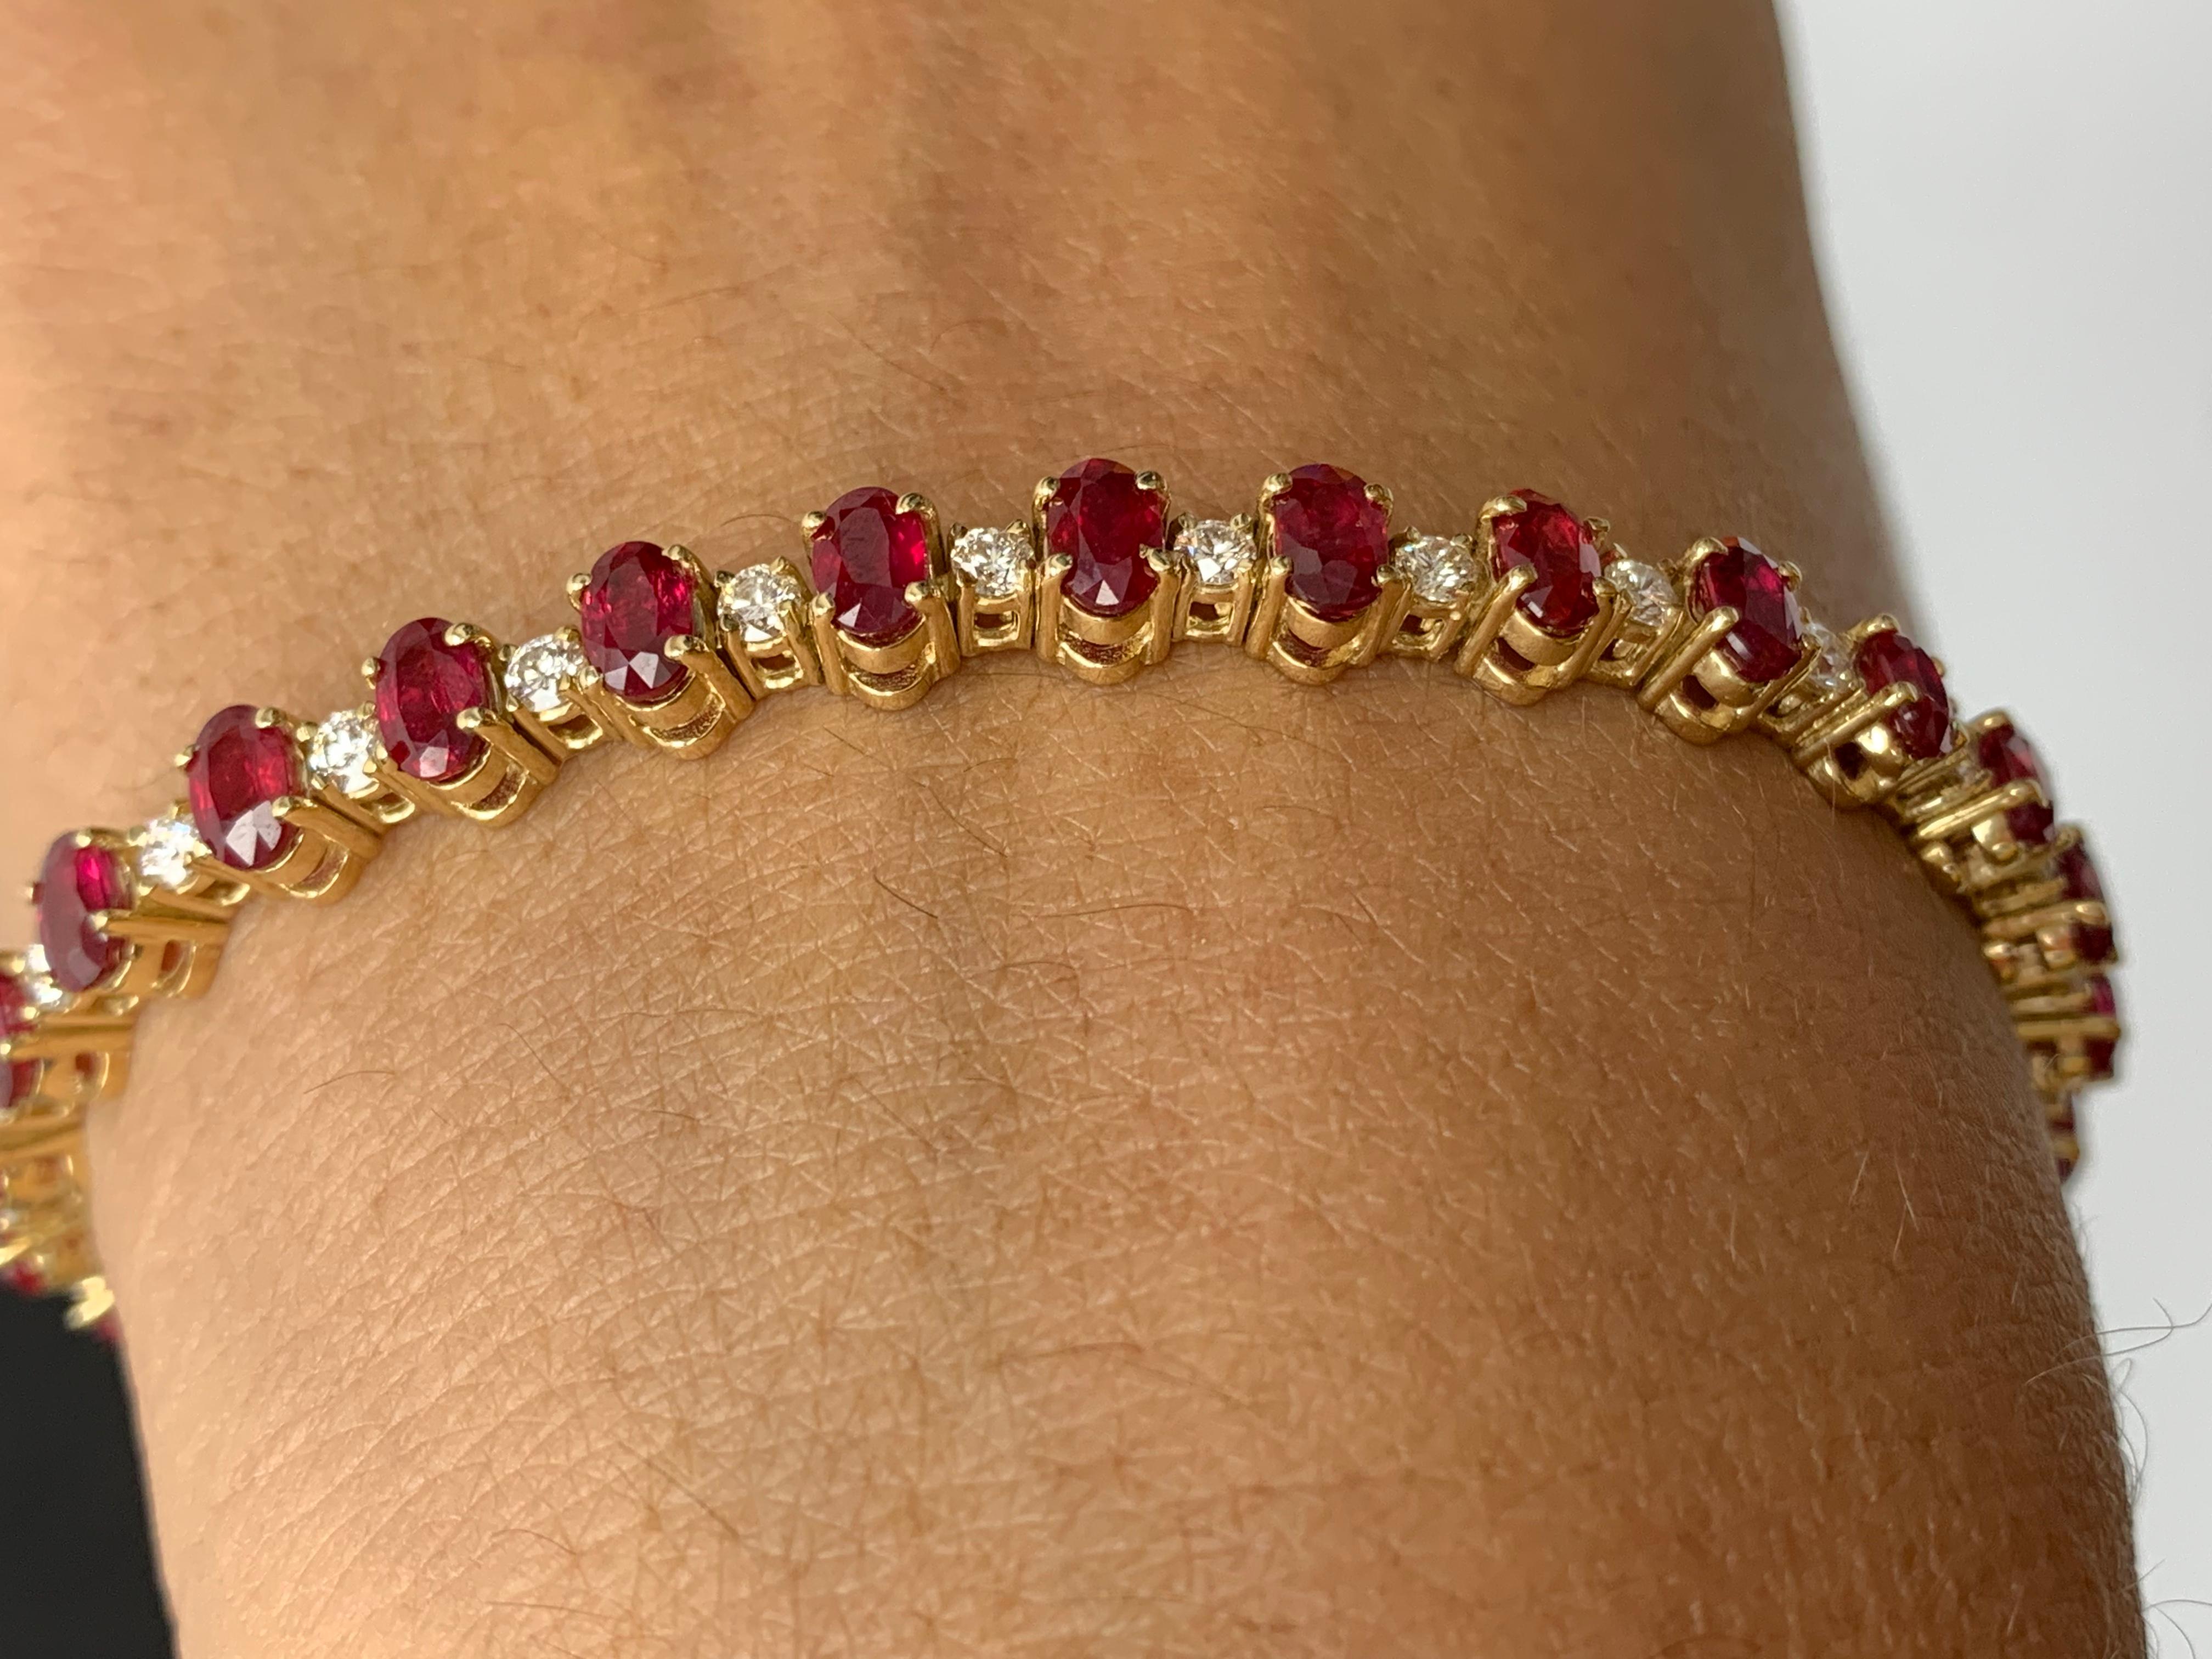 A stunning bracelet set with 30 Vibrant oval cut Red Rubies weighing 9.27 carats total. Alternating these rubies are 30 sparkling round diamonds weighing 1.48 carats total. Set in polished 14k yellow gold. Double lock mechanism for maximum security.